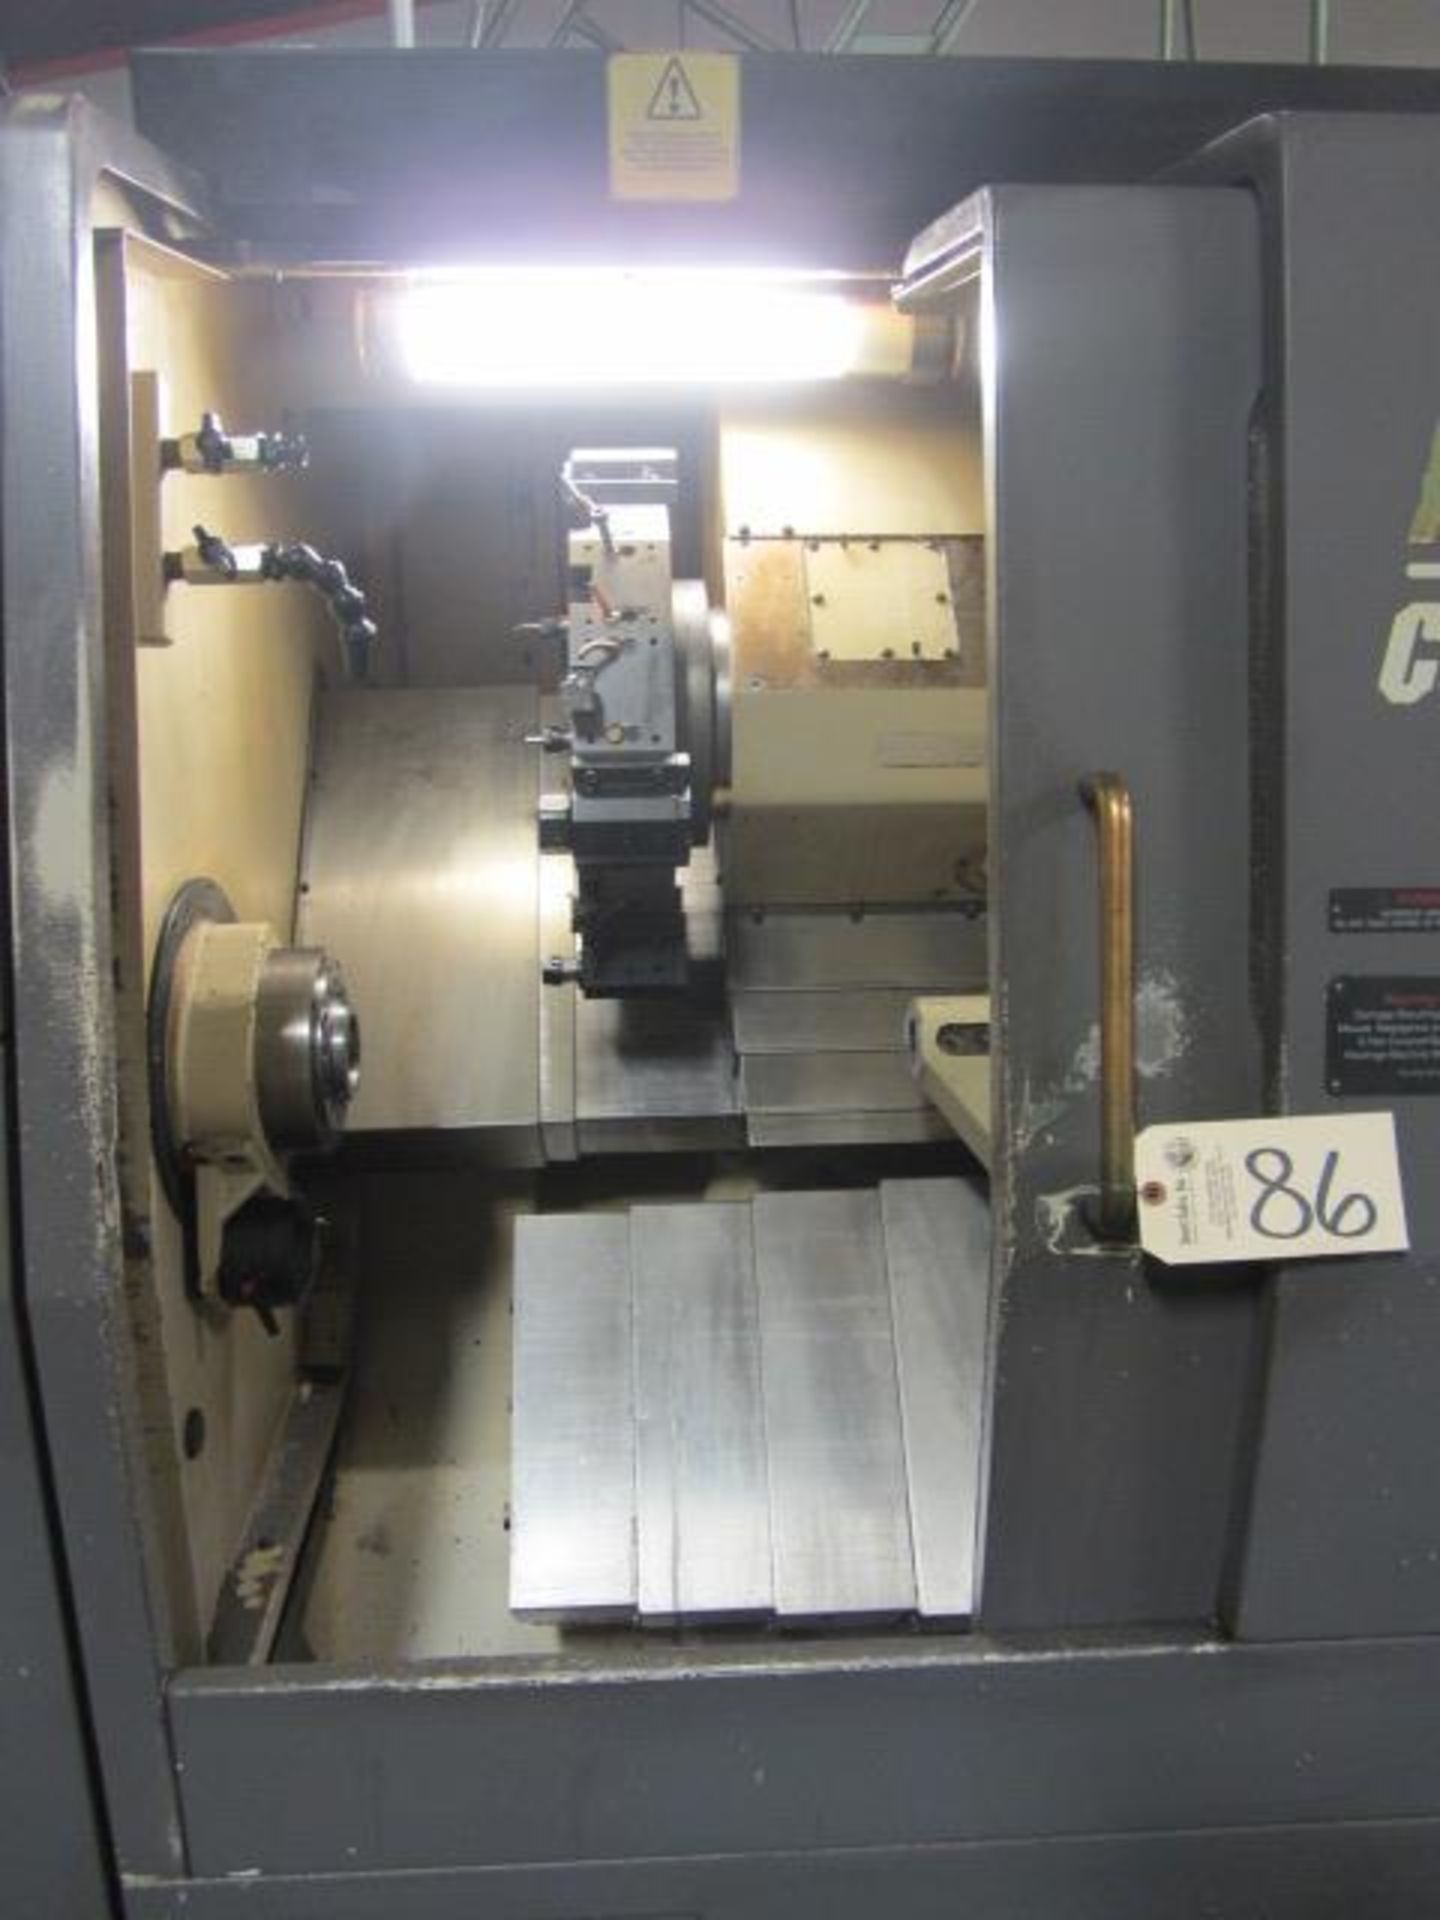 Hardinge Conquest T42SP CNC Turning Center with Built-In 16J Collet Chuck, 26'' Max Distance to - Image 3 of 8